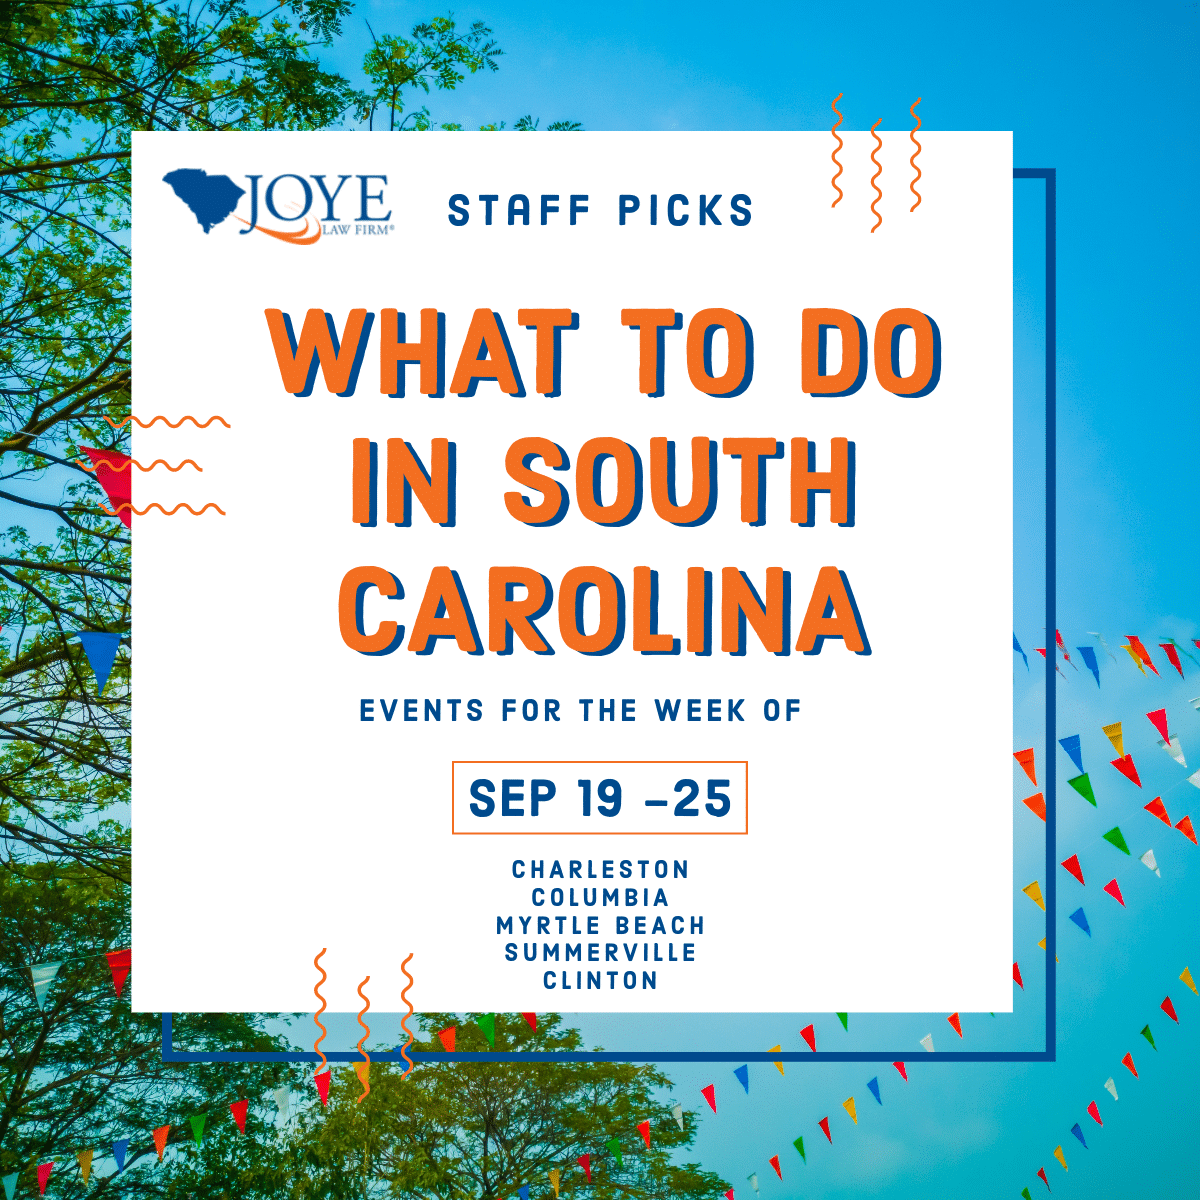 What to do in South Carolina events for the week of Sep 19-25 for Charleston, Columbia, Myrtle Beach, Summerville and upstate